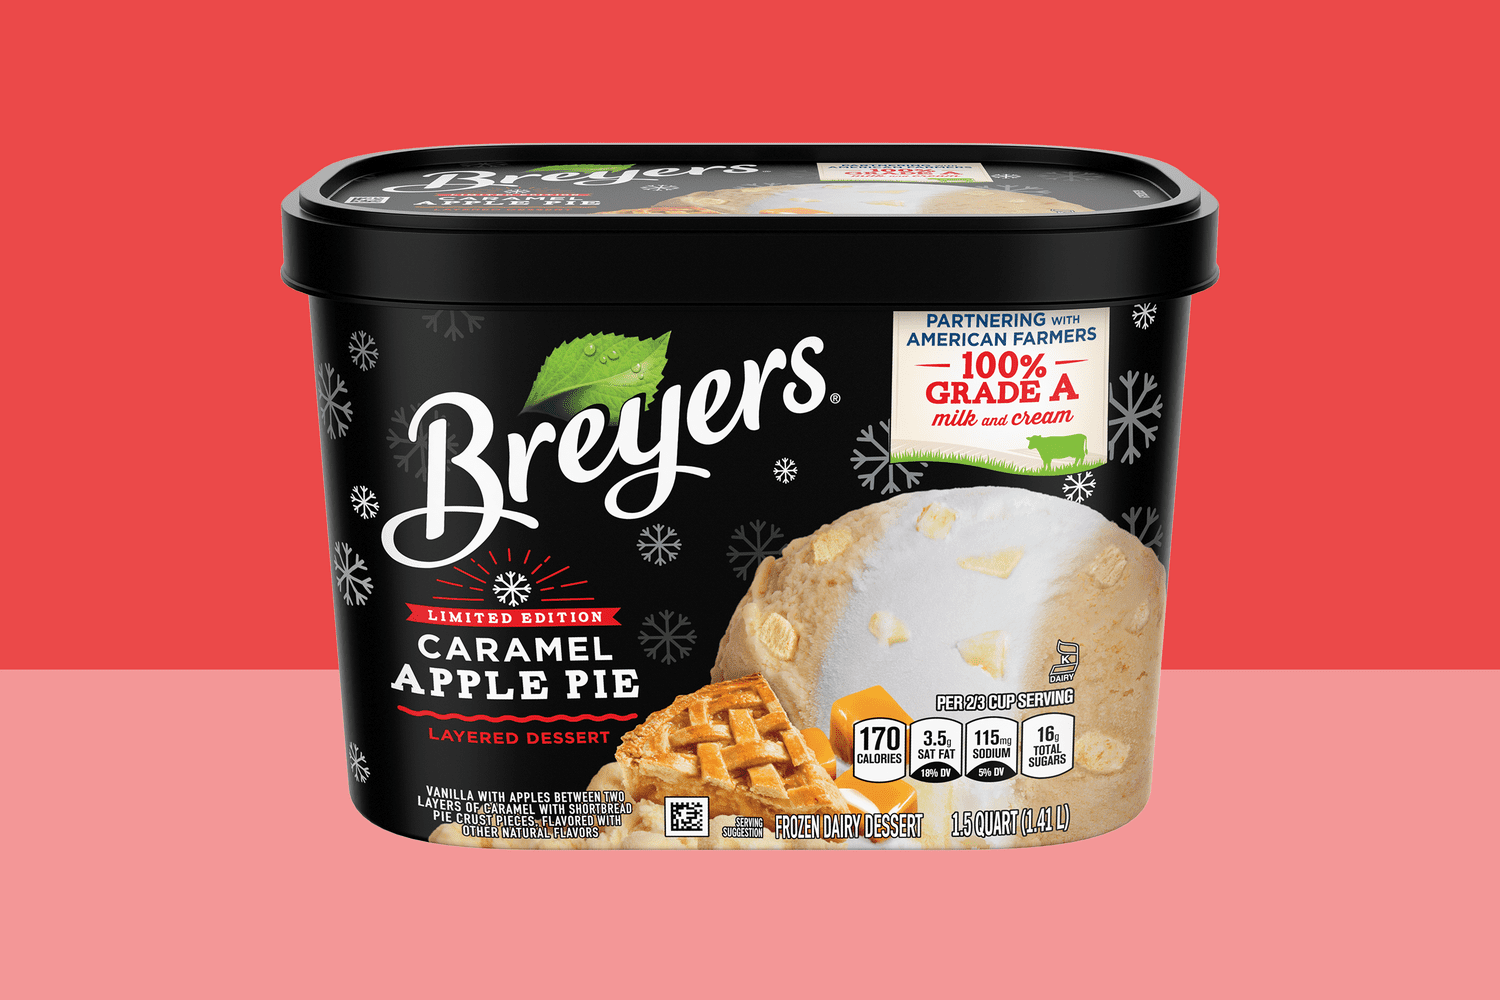 a carton of Breyers Limited Edition Caramel Apple Pie Layered Desserts on a two-tone red background